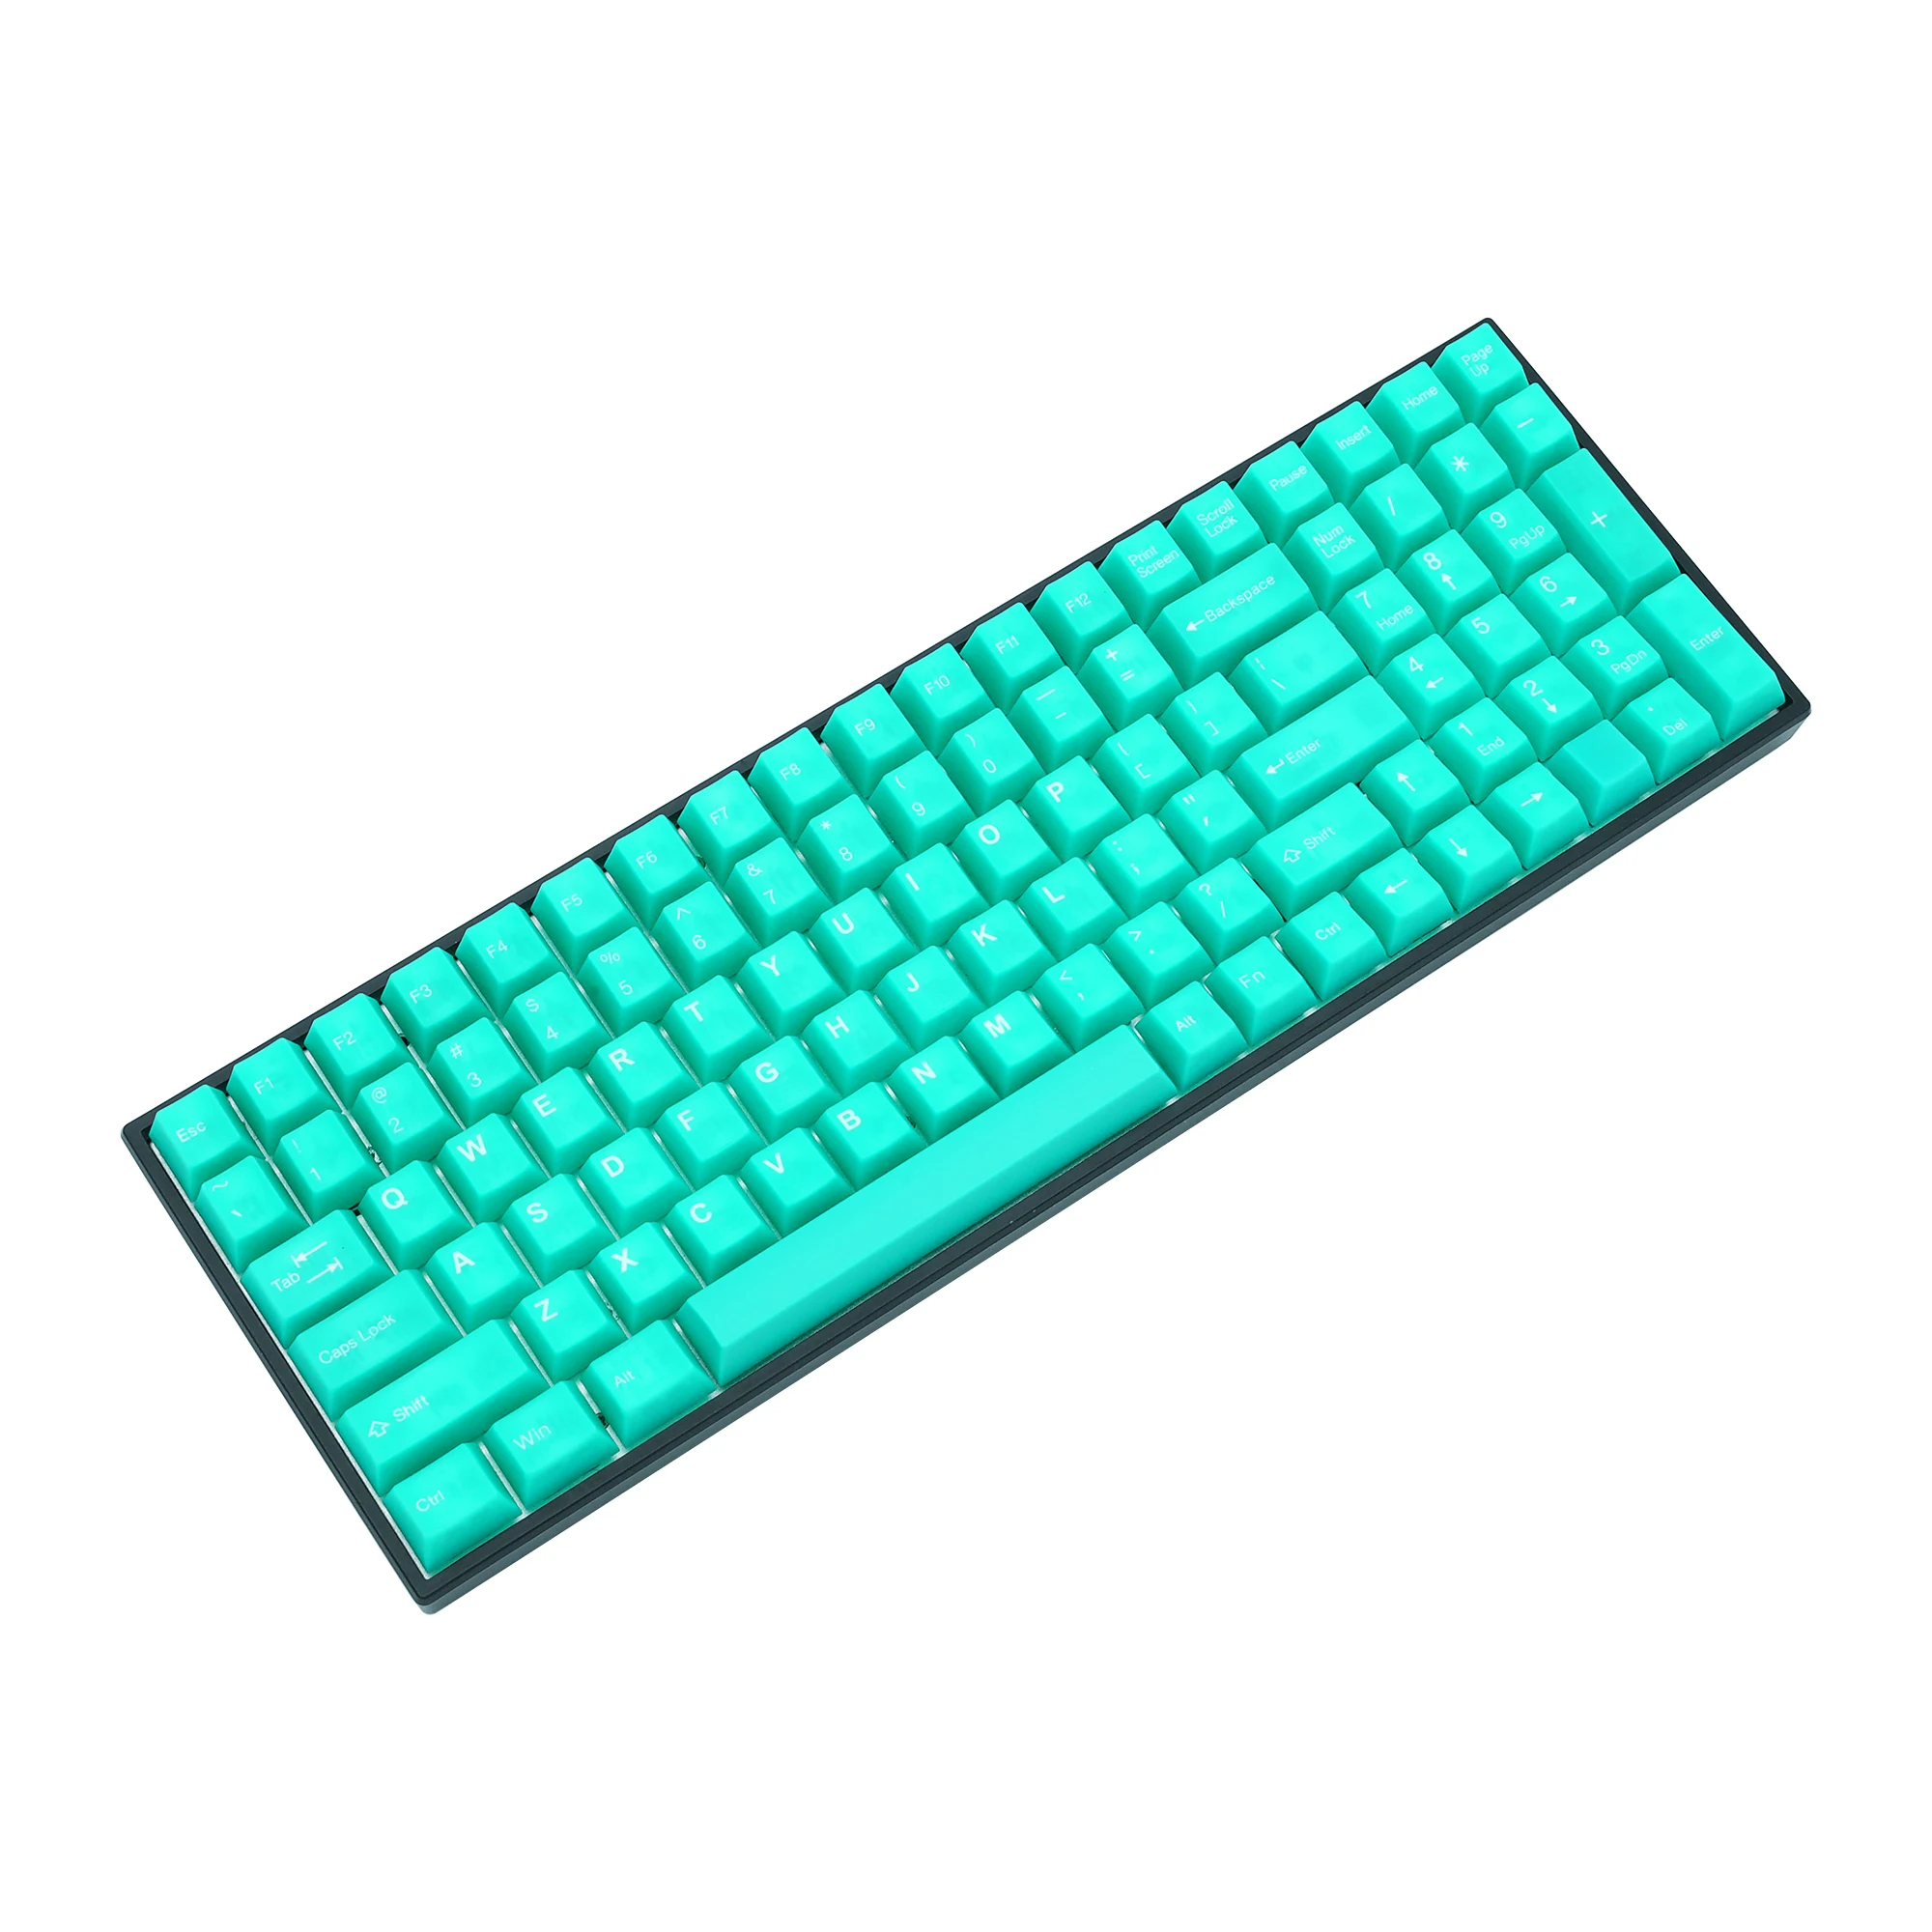 Taihao Haunted Jelly Jade ABS Doubleshot Keycap Translucent Cubic for mechanical keyboard color of Green Colorway 3 - Pudding Keycap